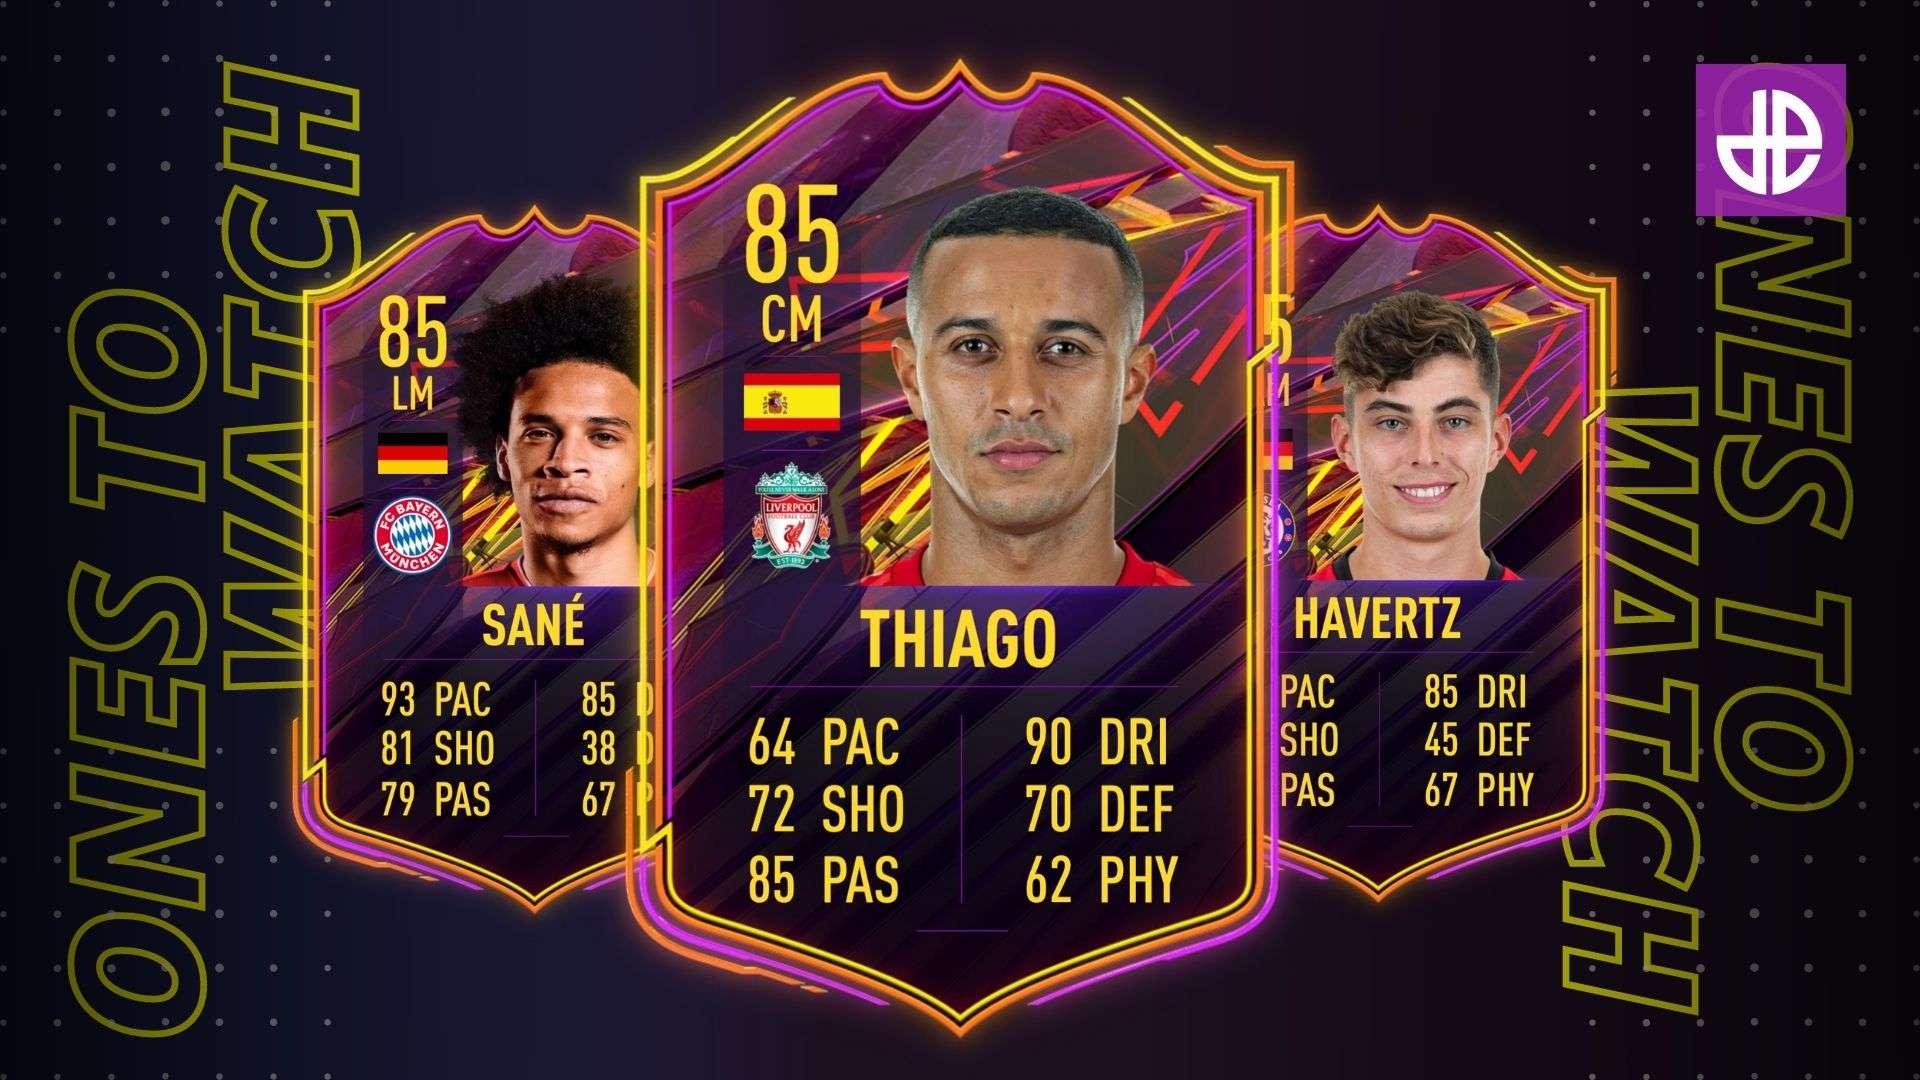 FIFA 21 Ones to Watch Team 2